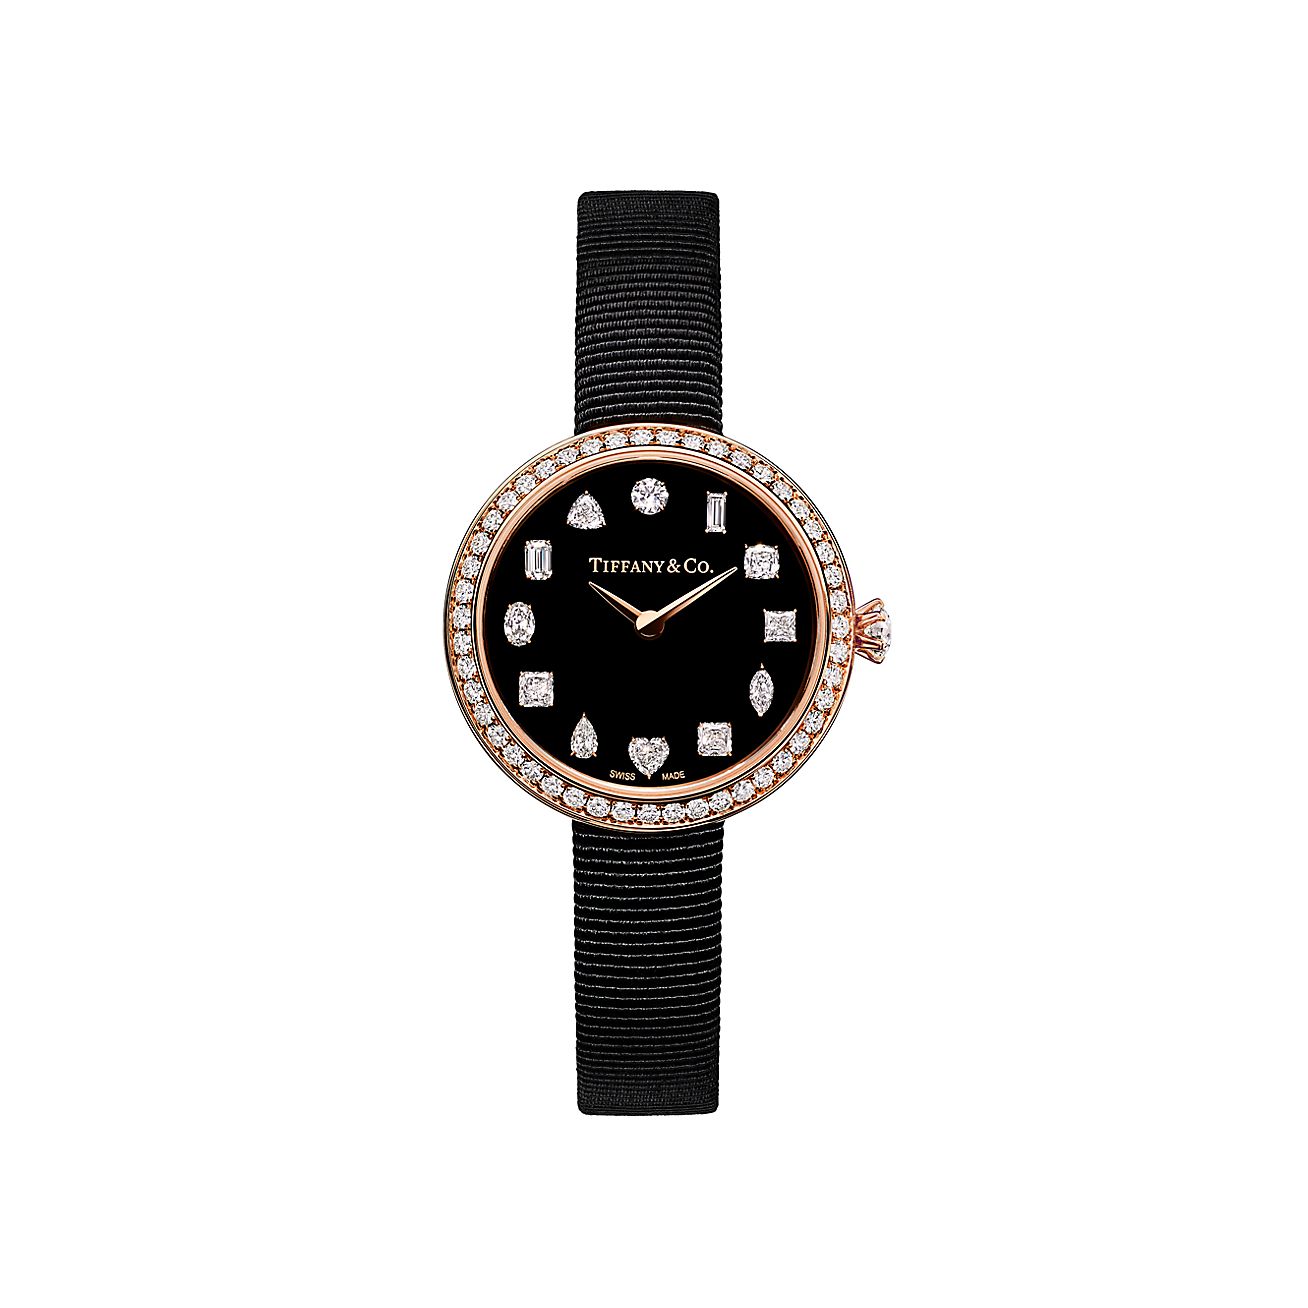 Tiffany Eternity 28 mm Round Watch in Rose Gold with Diamonds | Tiffany &